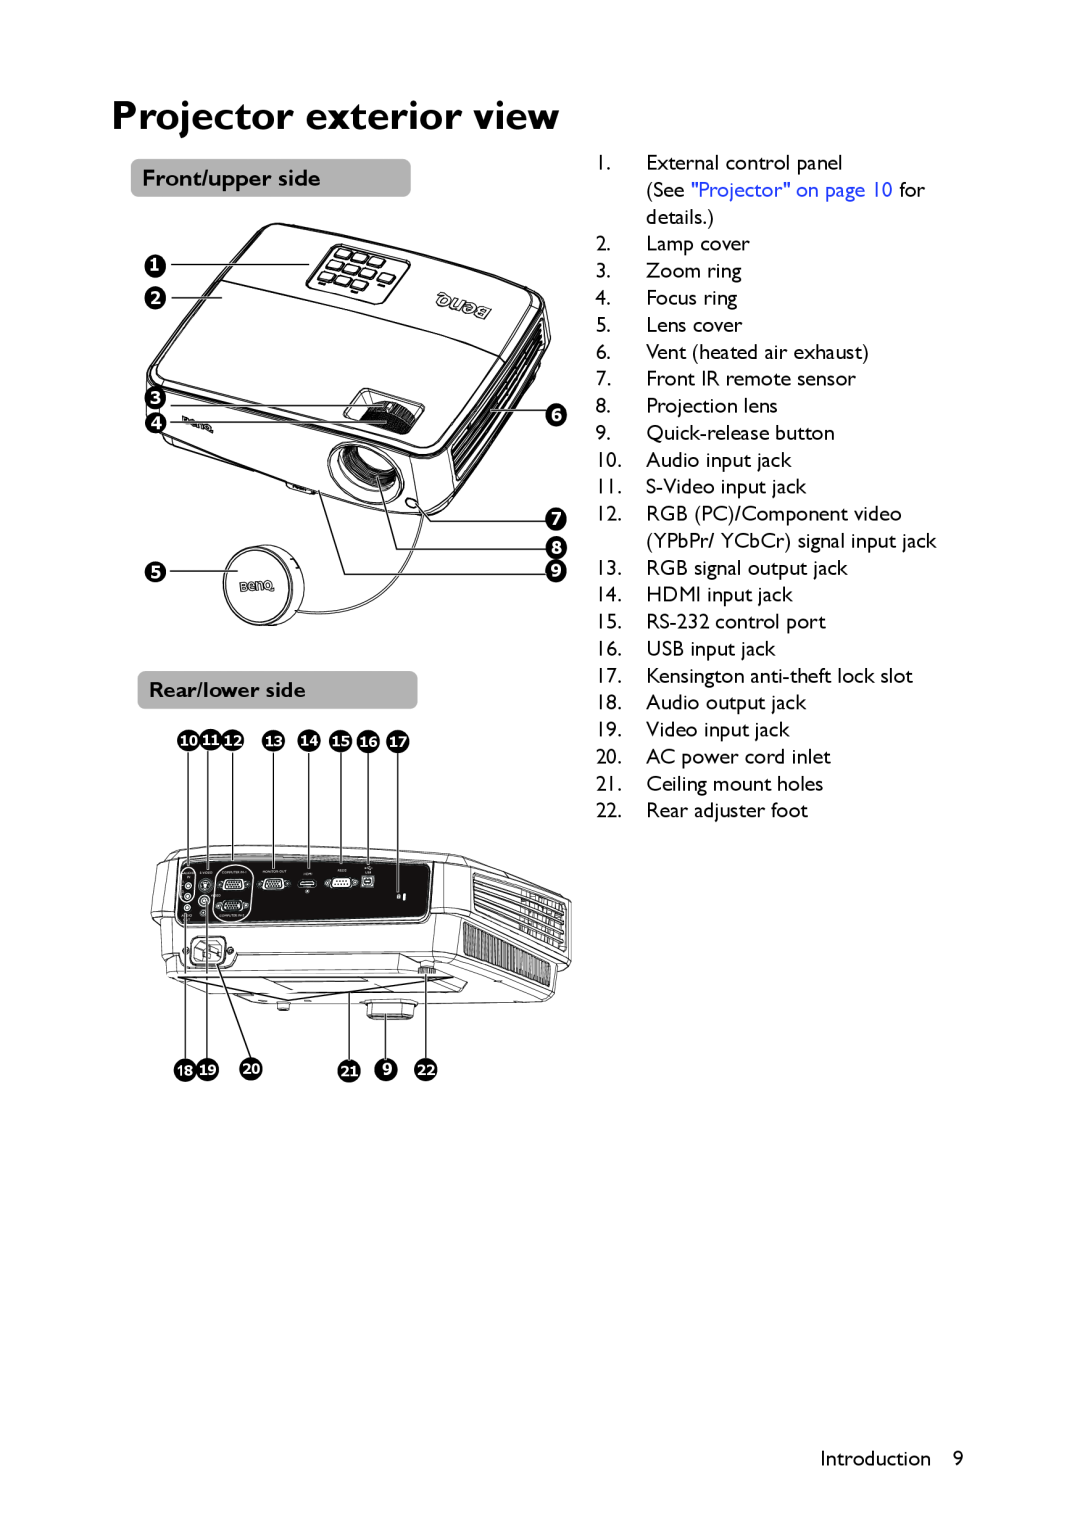 BenQ MS521 user manual Projector exterior view, Front/upper side, See Projector on page 10 for details 